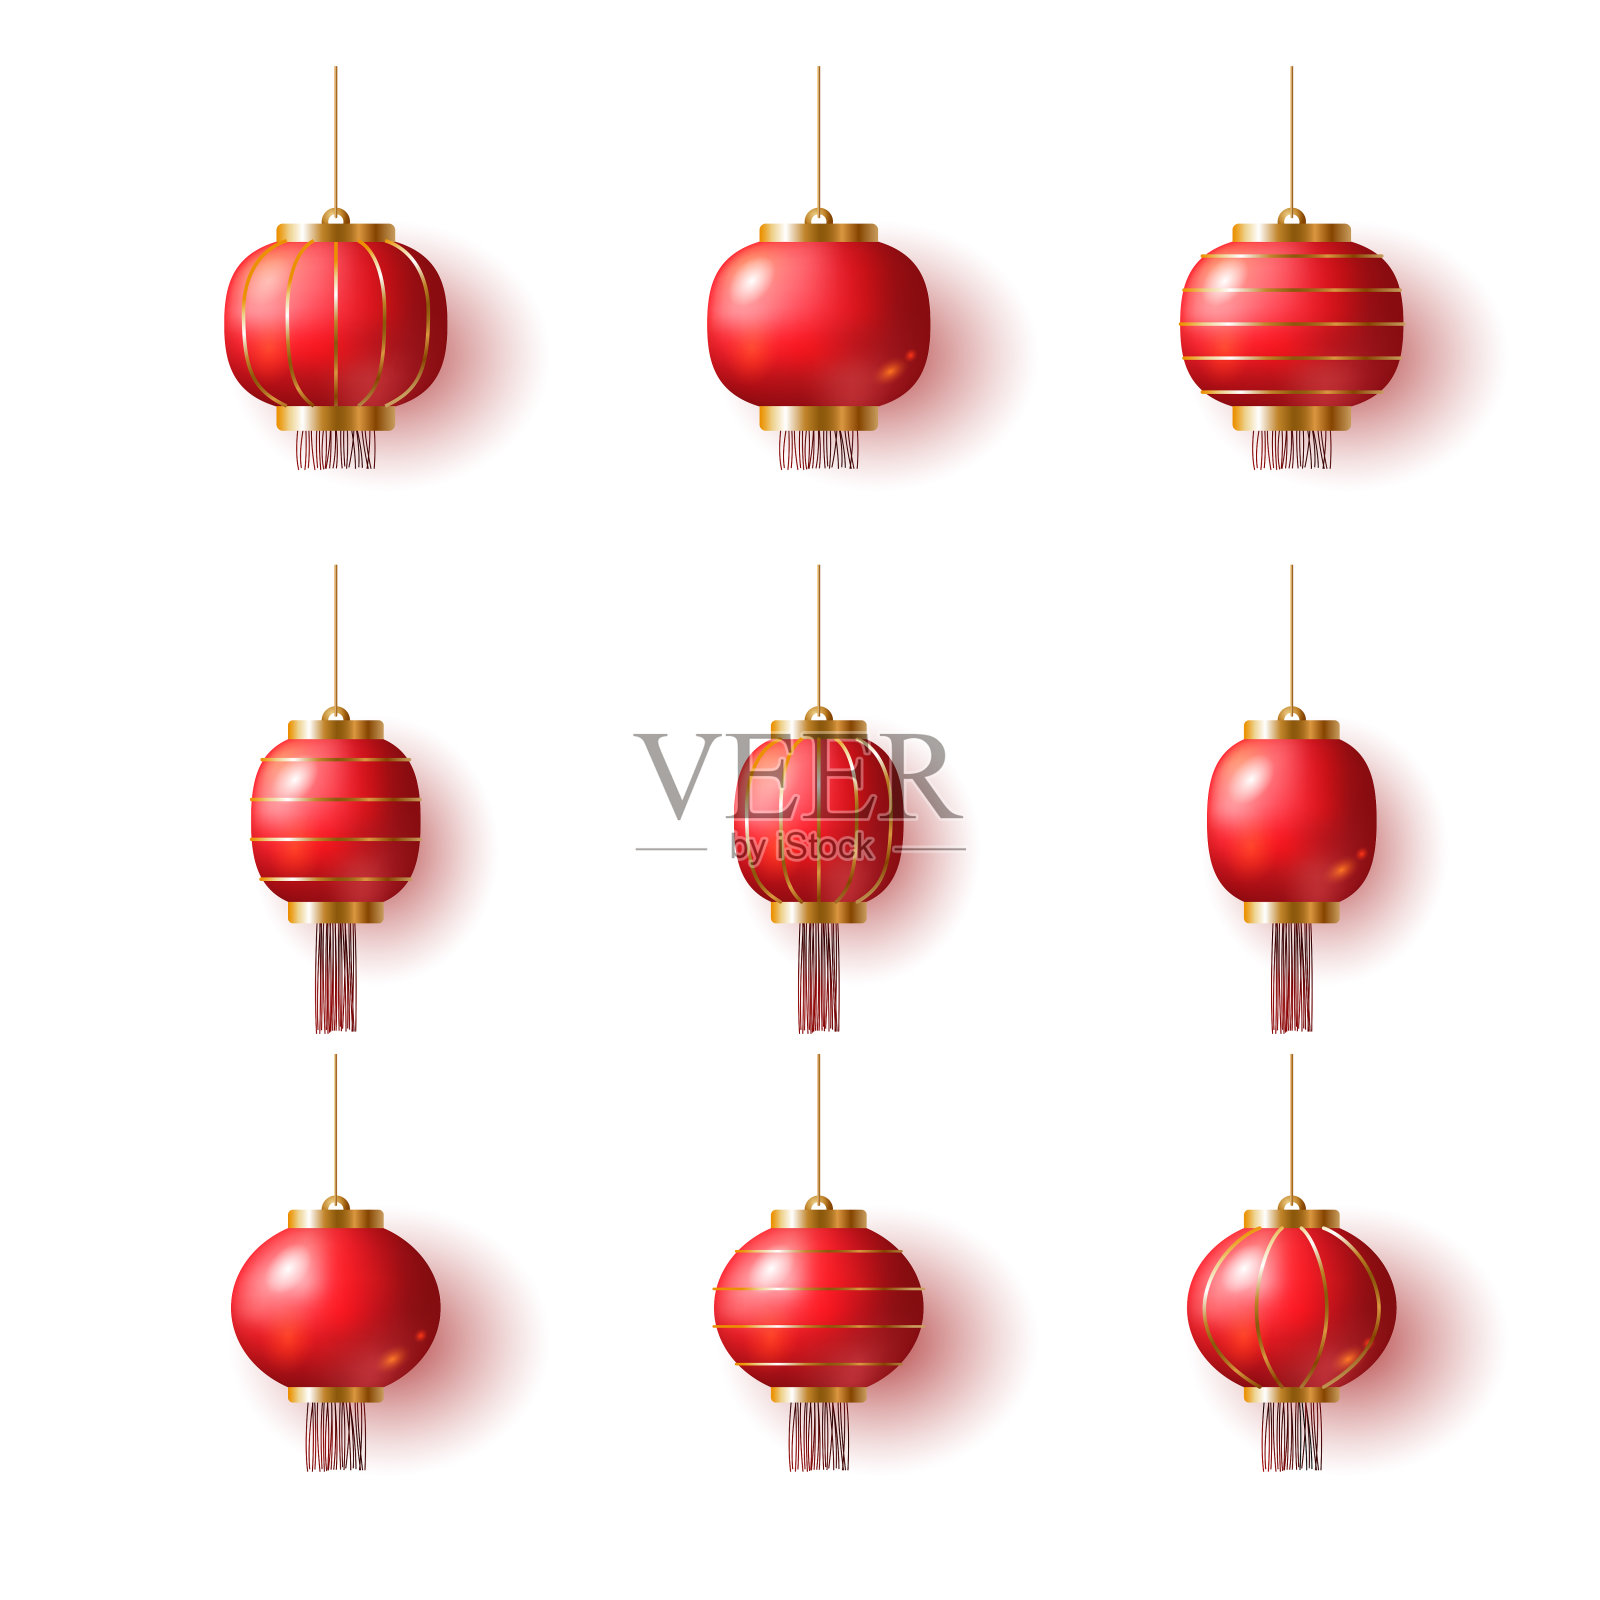 Red hanging lantern Traditional Asian decoration. Decorations for the Chinese New Year. Chinese lantern festival. Realistic 3d design. Set of Chinese Lanterns collection. Chinese new year设计元素图片